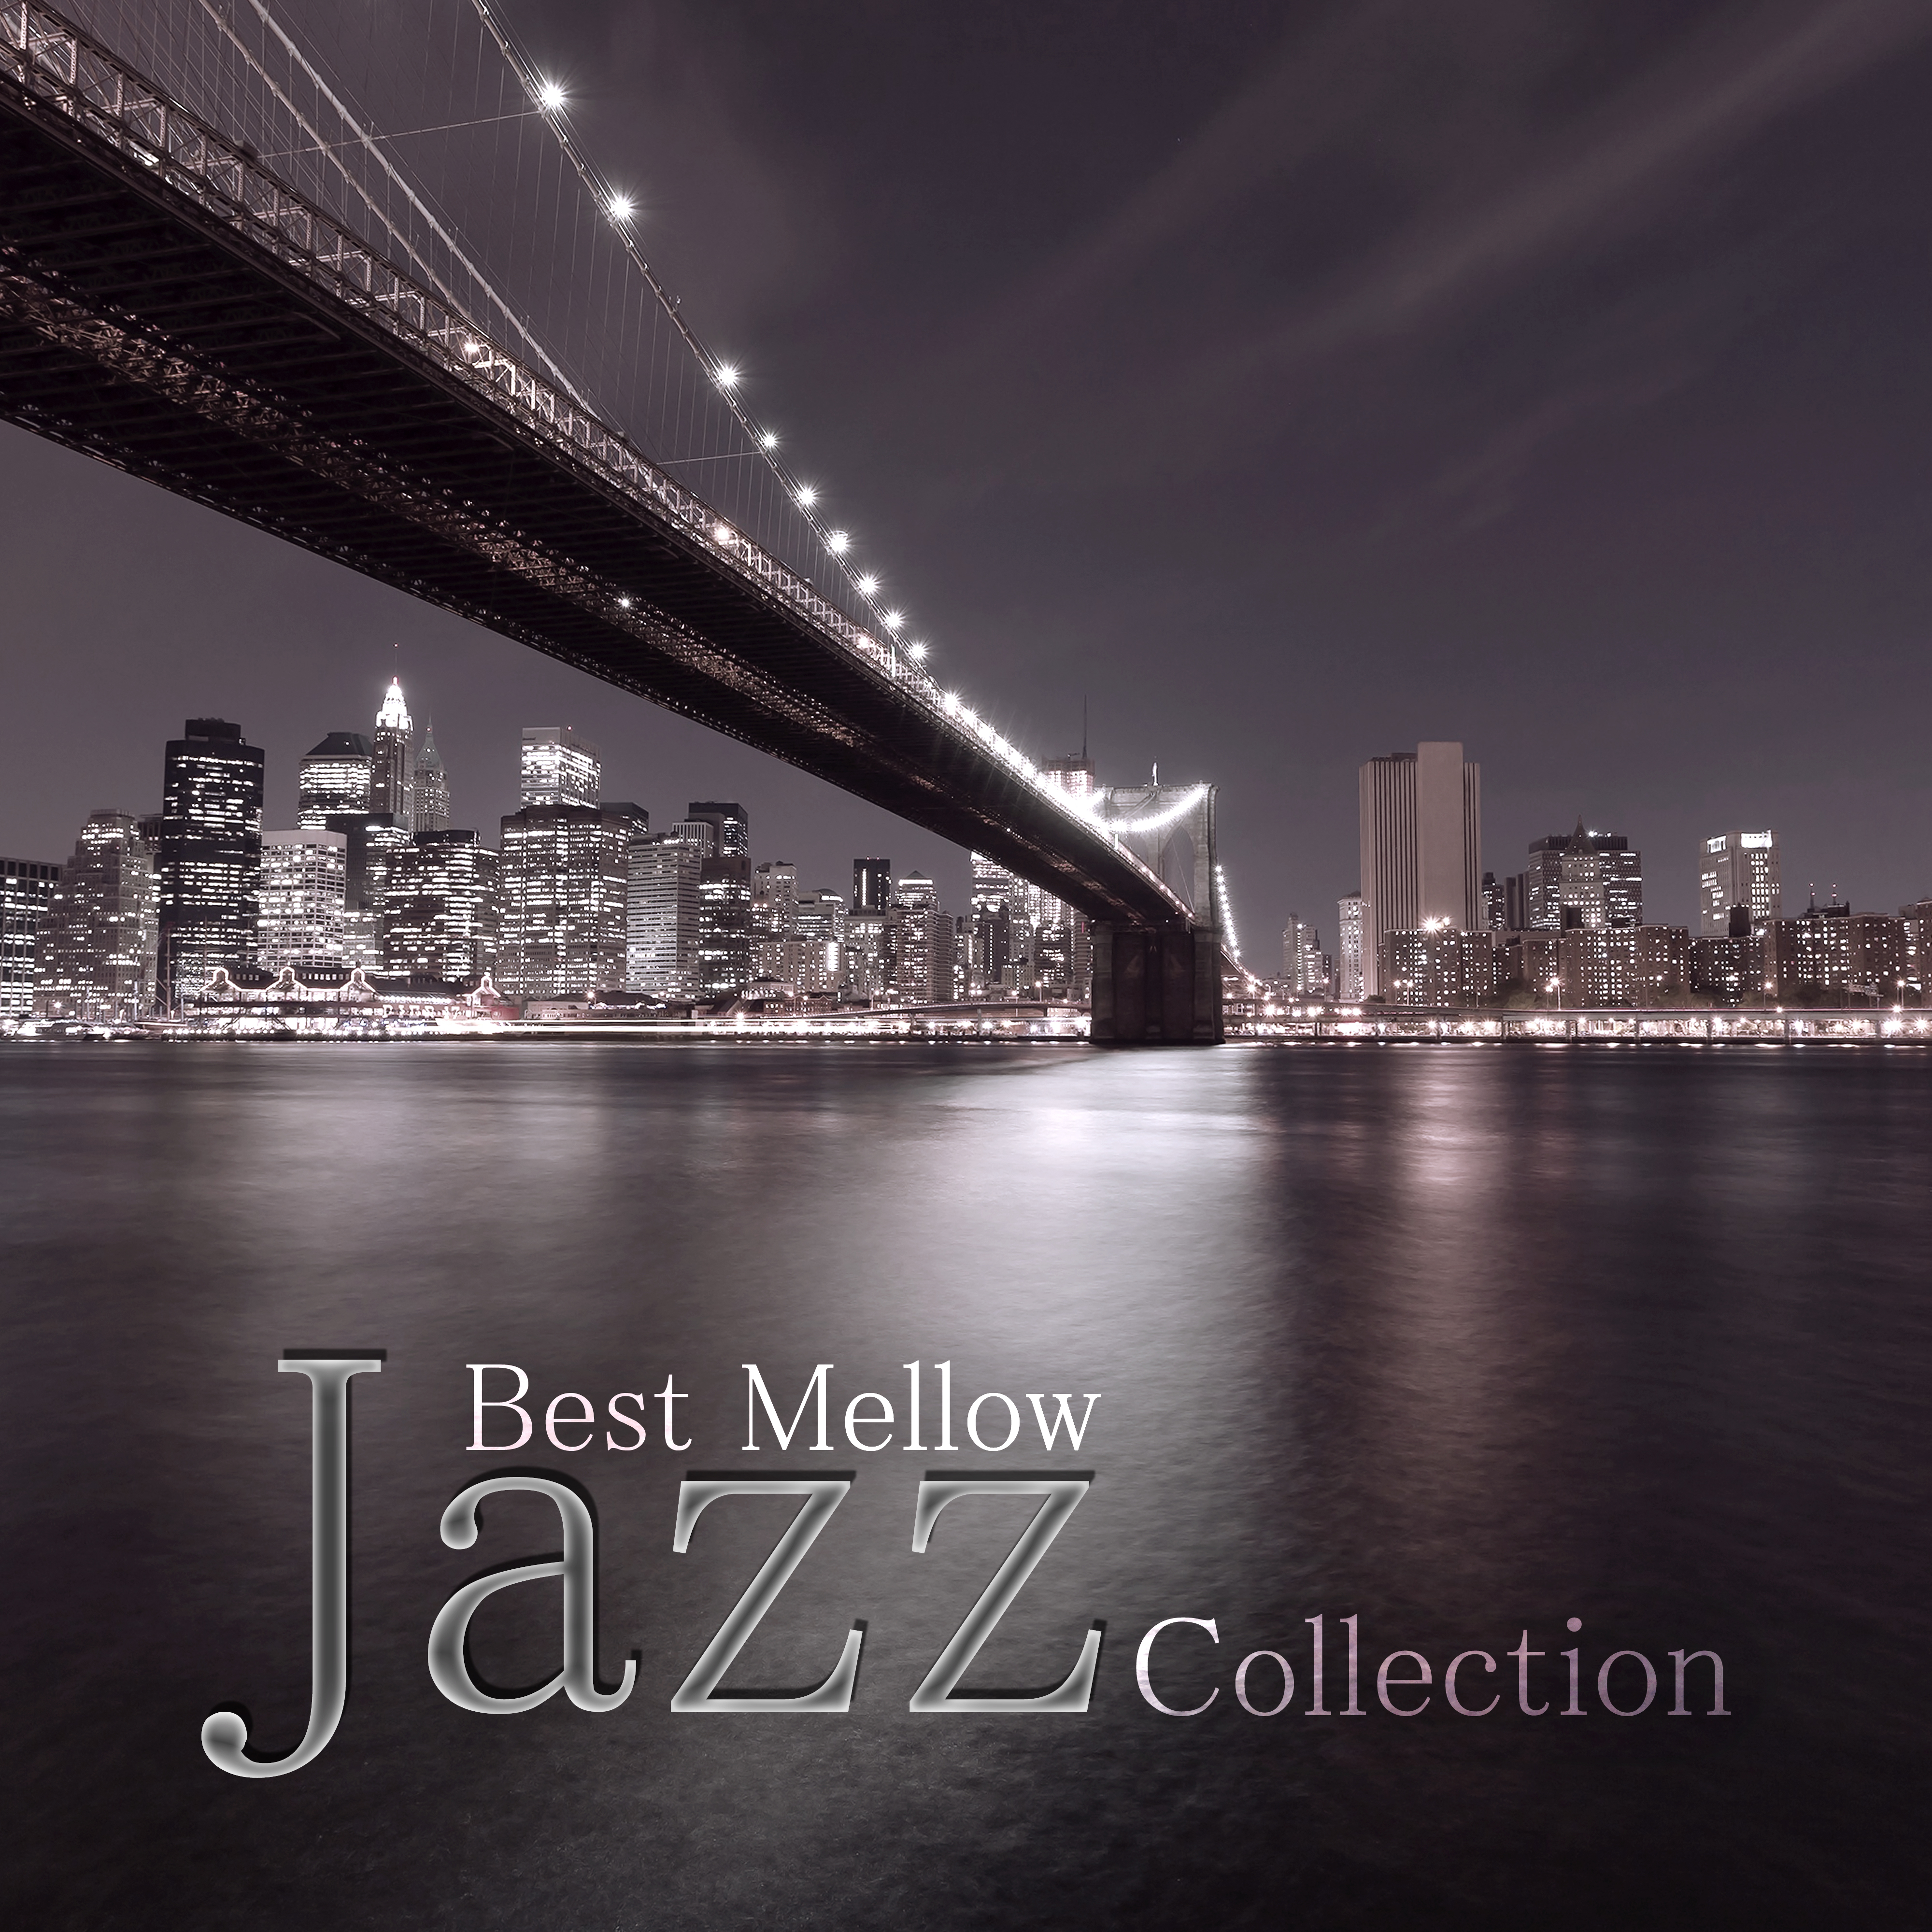 Best Mellow Jazz Collection – Cool Instrumental Piano Jazz Music, Sensual Sounds for Serenity, Smooth Jazz Guitar Lounge Grooves